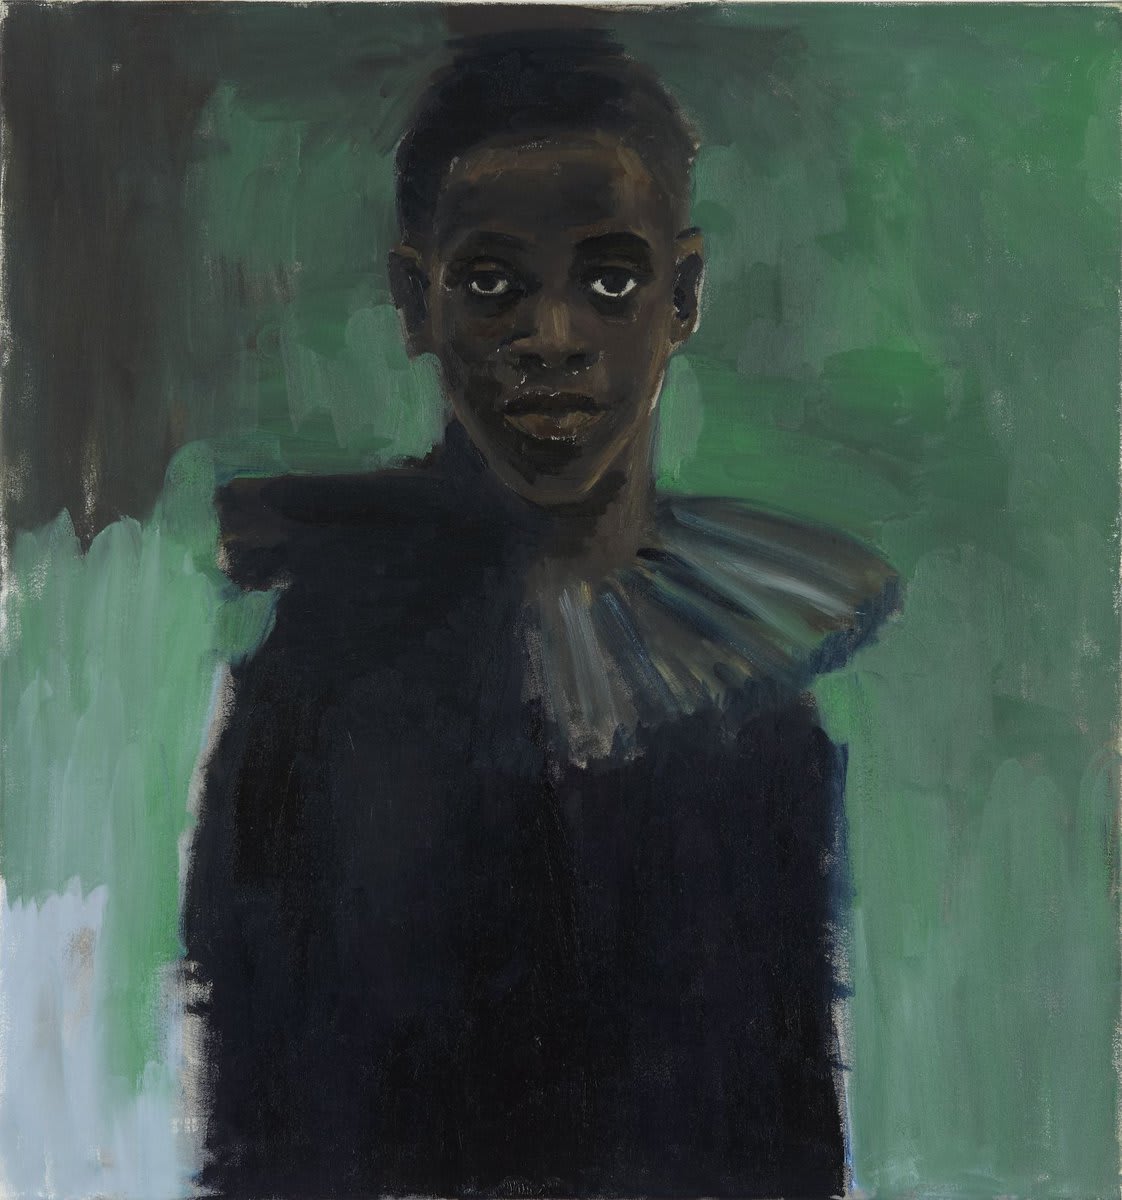 📢 Tickets are on sale today for Tate Britain's major exhibition of #LynetteYiadomBoakye! It'll be the biggest show to date of one of the most important painters working today. Tickets here: